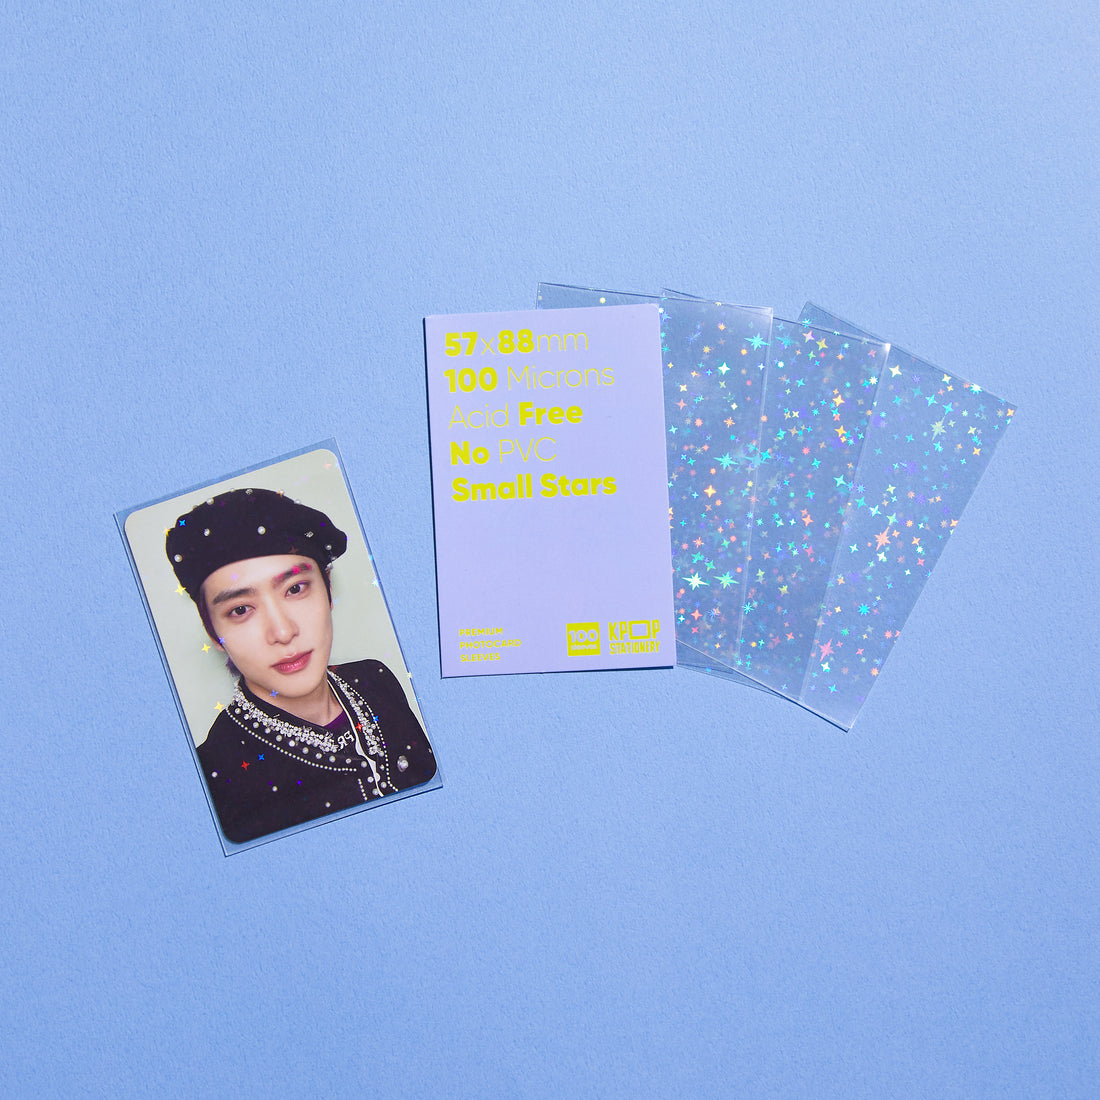 kpop holographic photocard sleeves for 57 x 88, small star